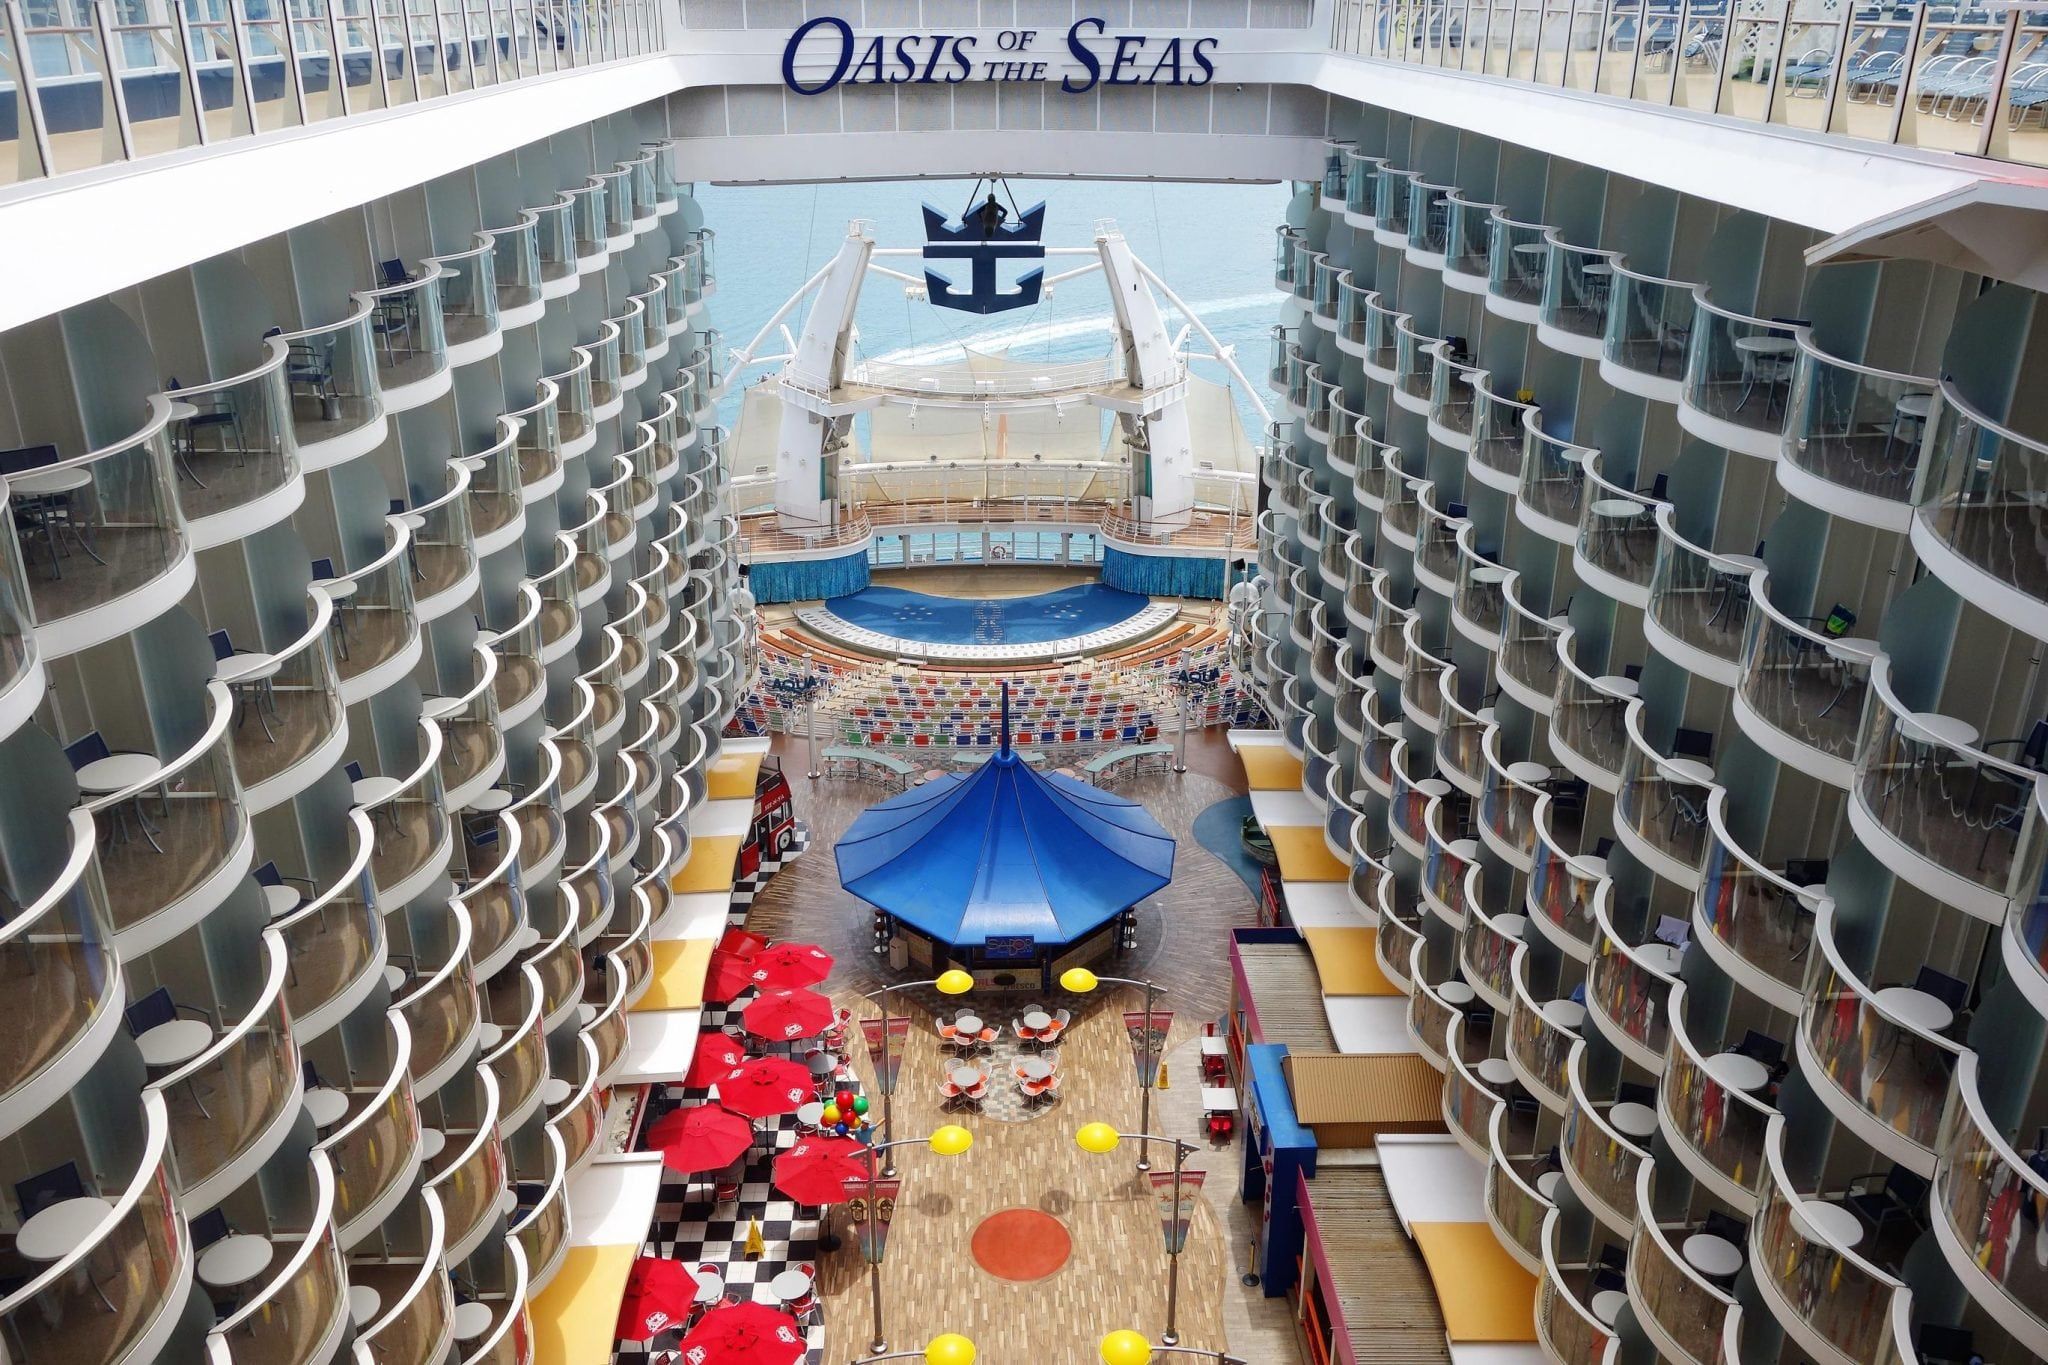 Oasis of the Seas Boardwalk Pictures You Need to Take